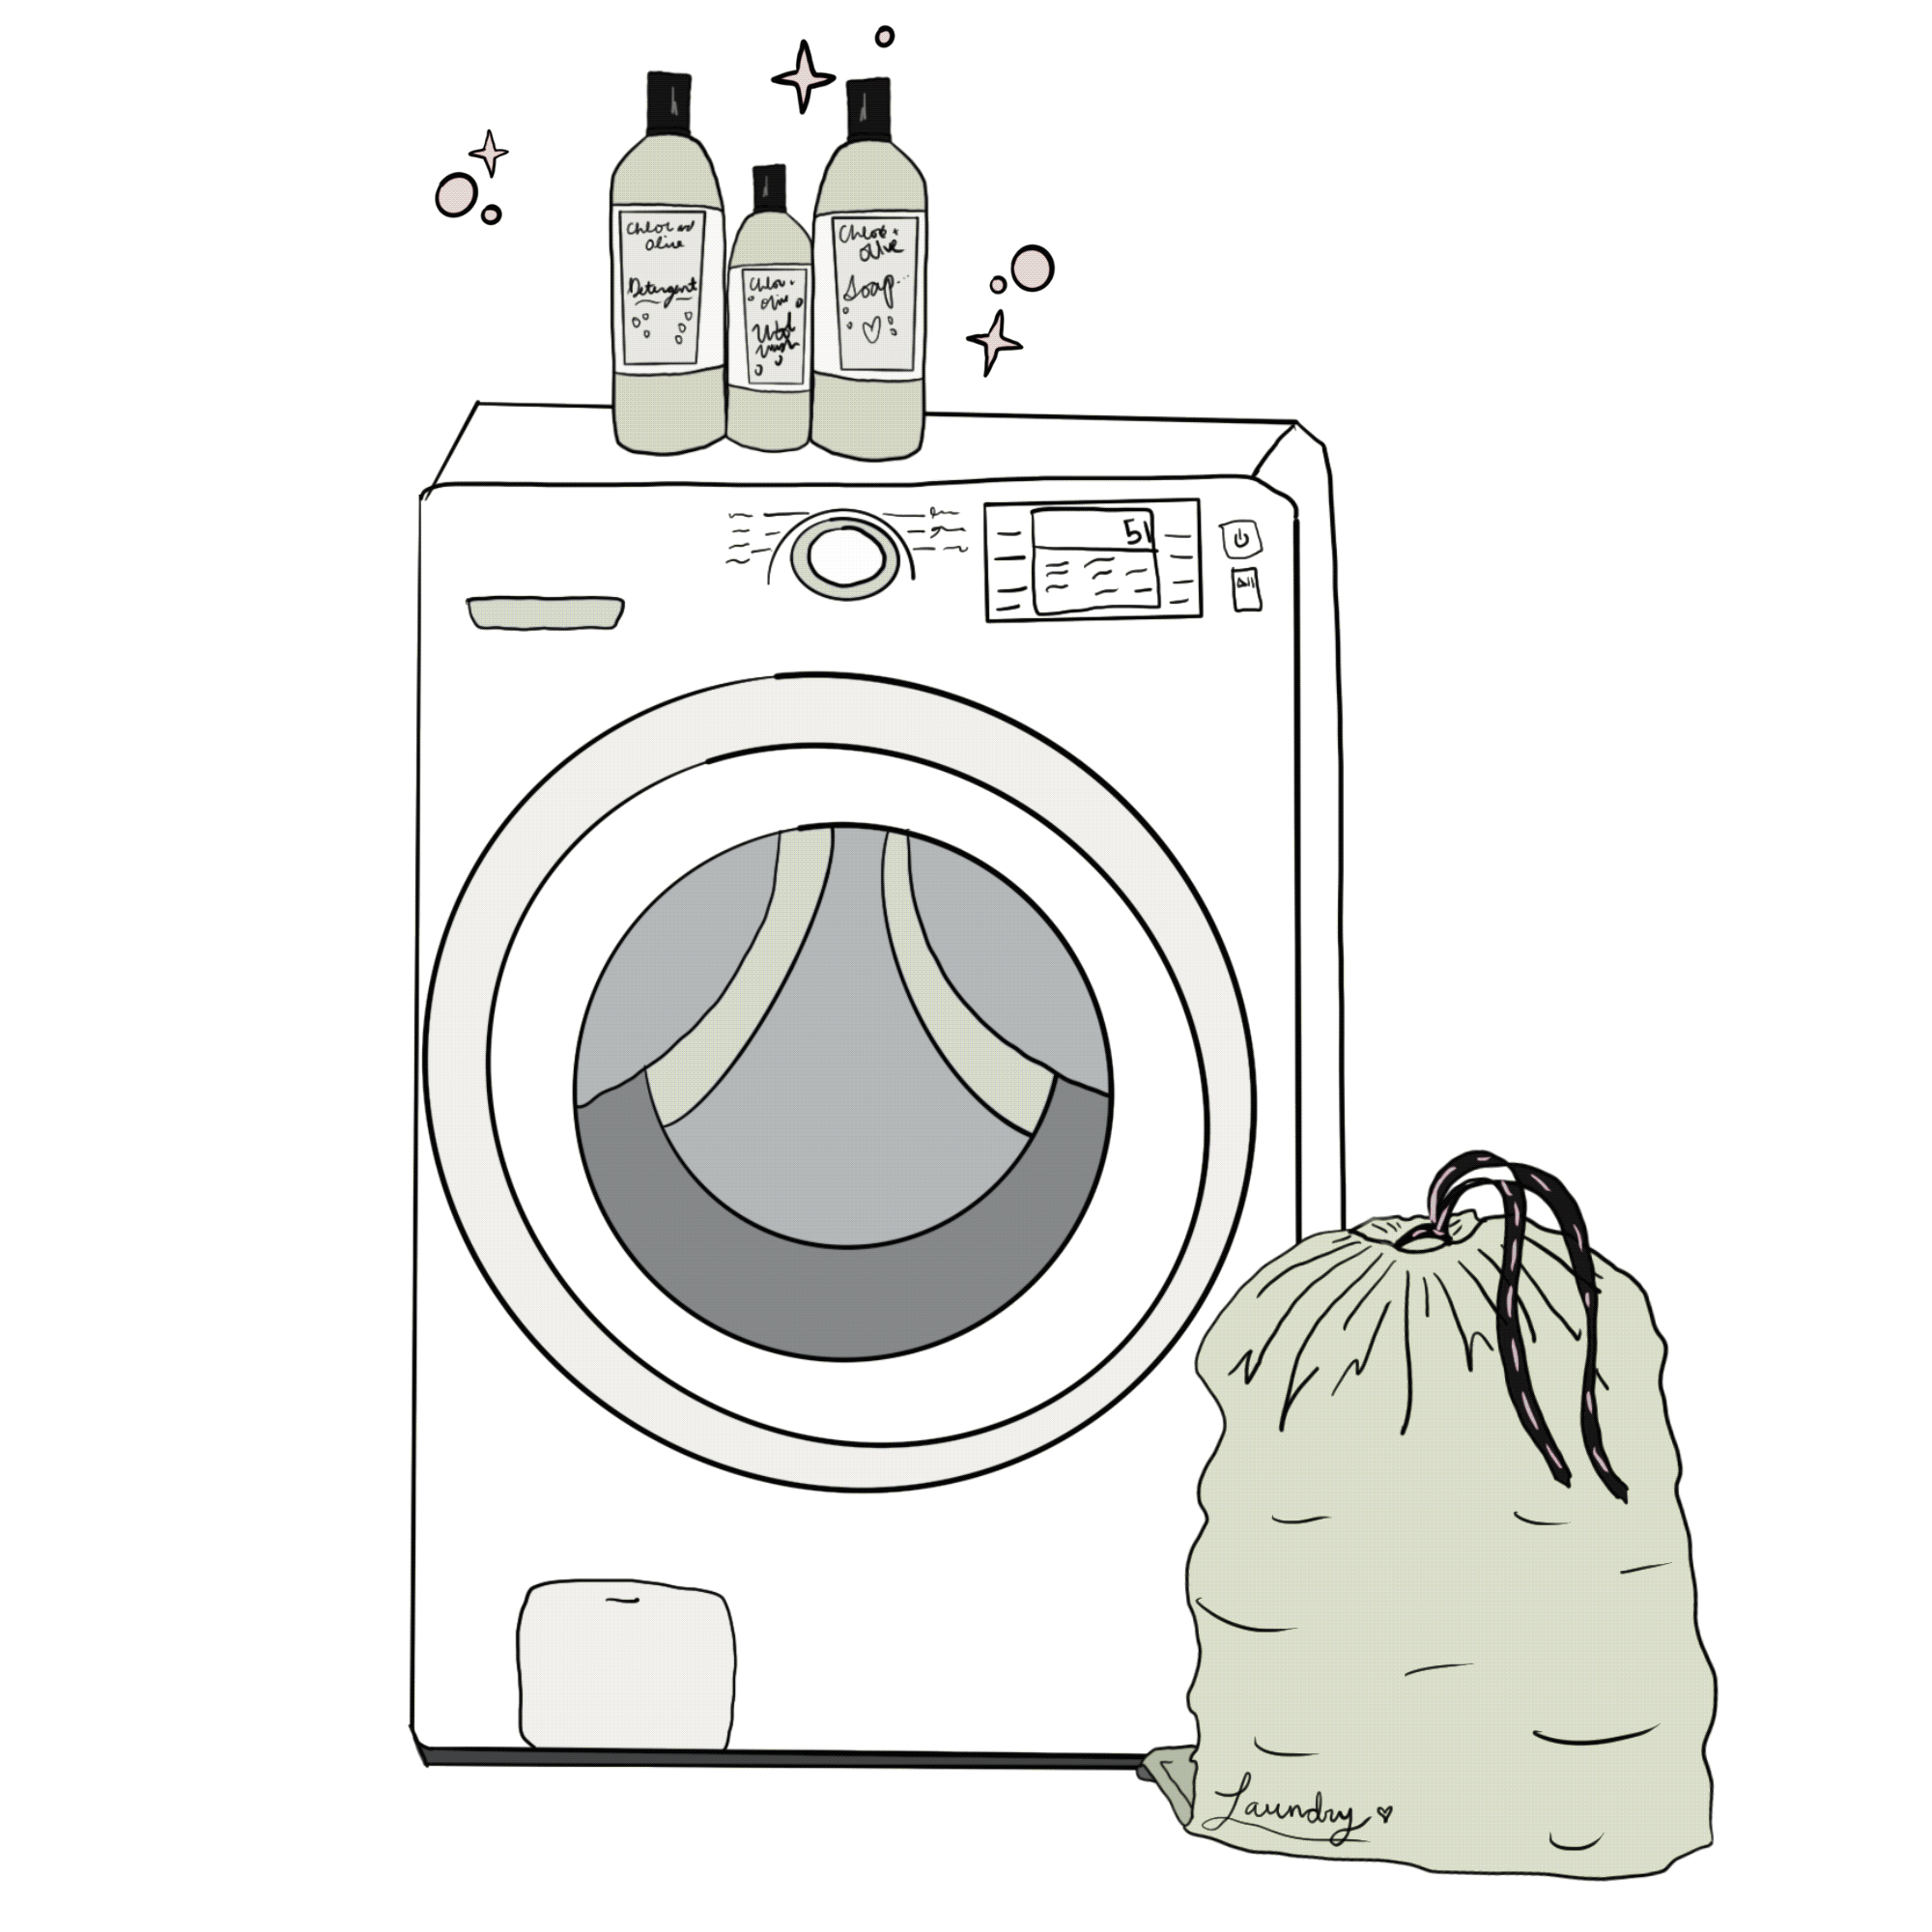 How To Wash White Clothes And Keep Them White & Bright